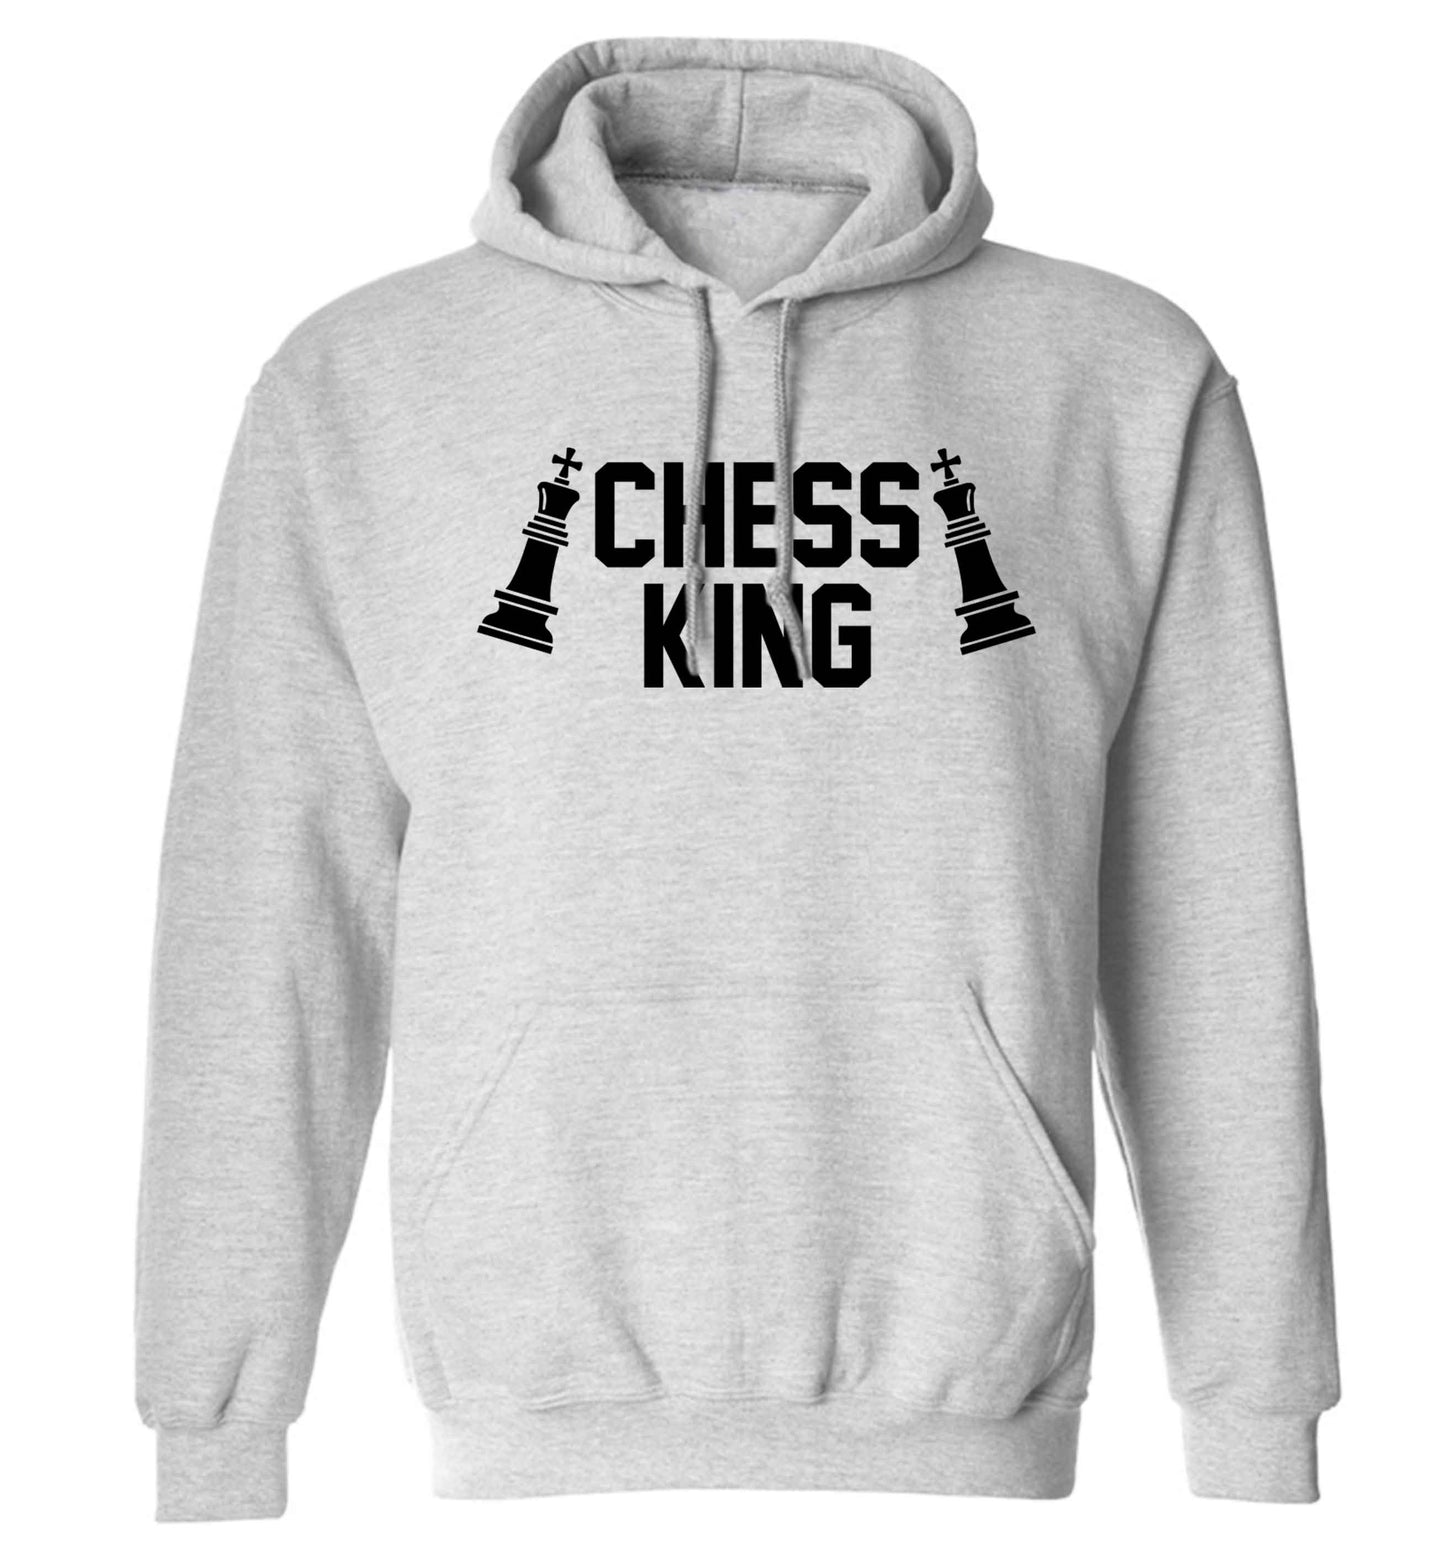 Chess king adults unisex grey hoodie 2XL